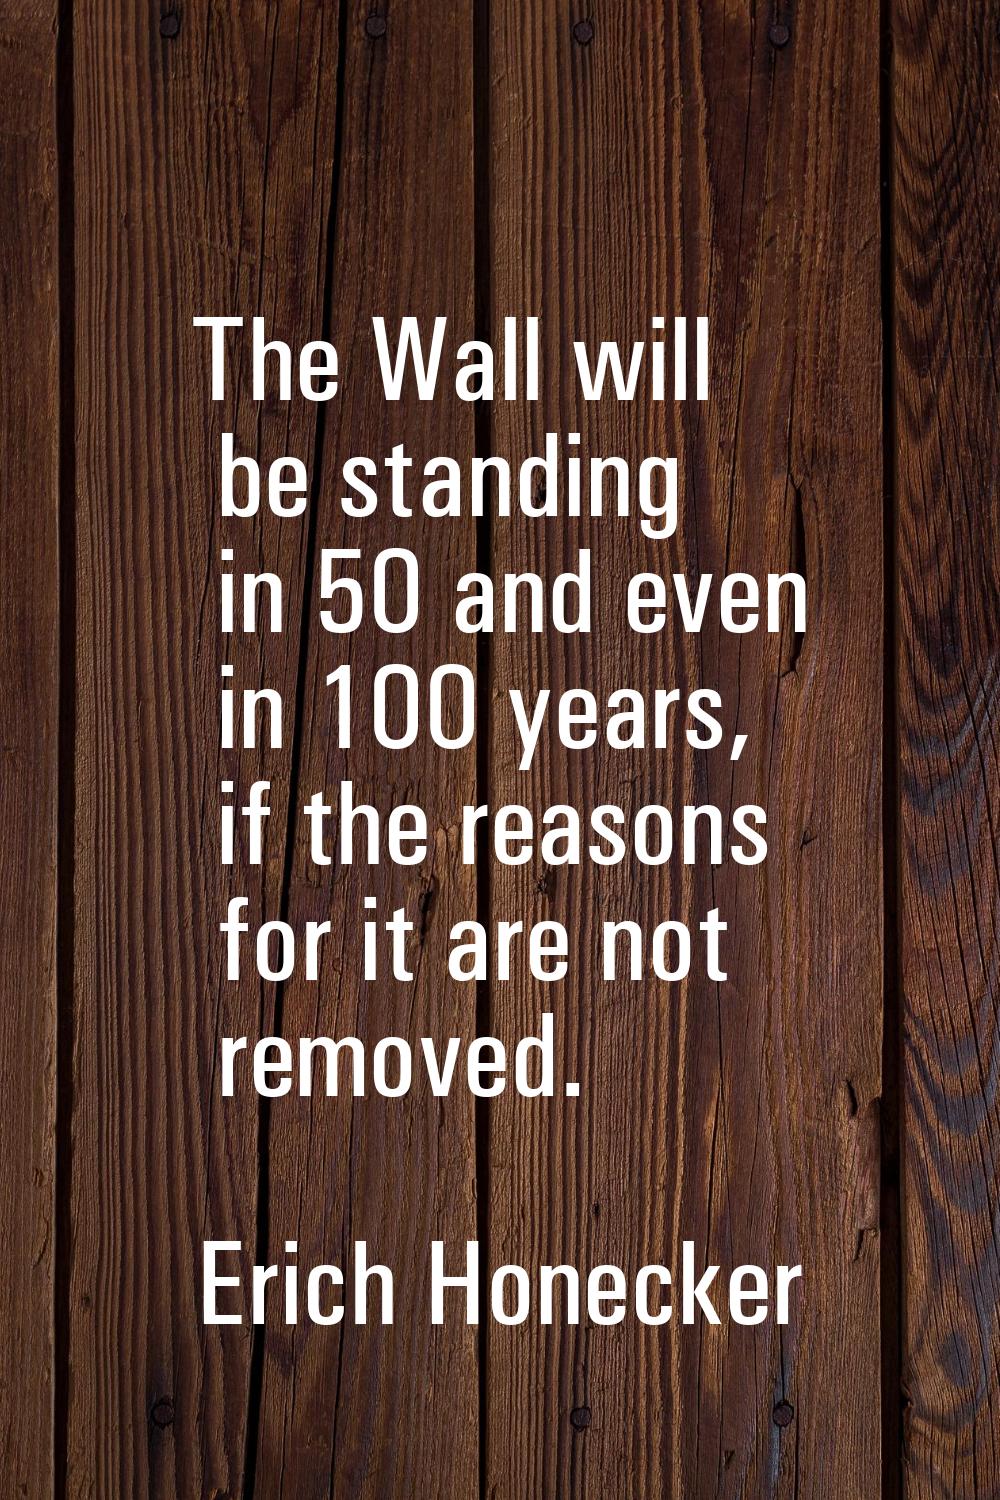 The Wall will be standing in 50 and even in 100 years, if the reasons for it are not removed.